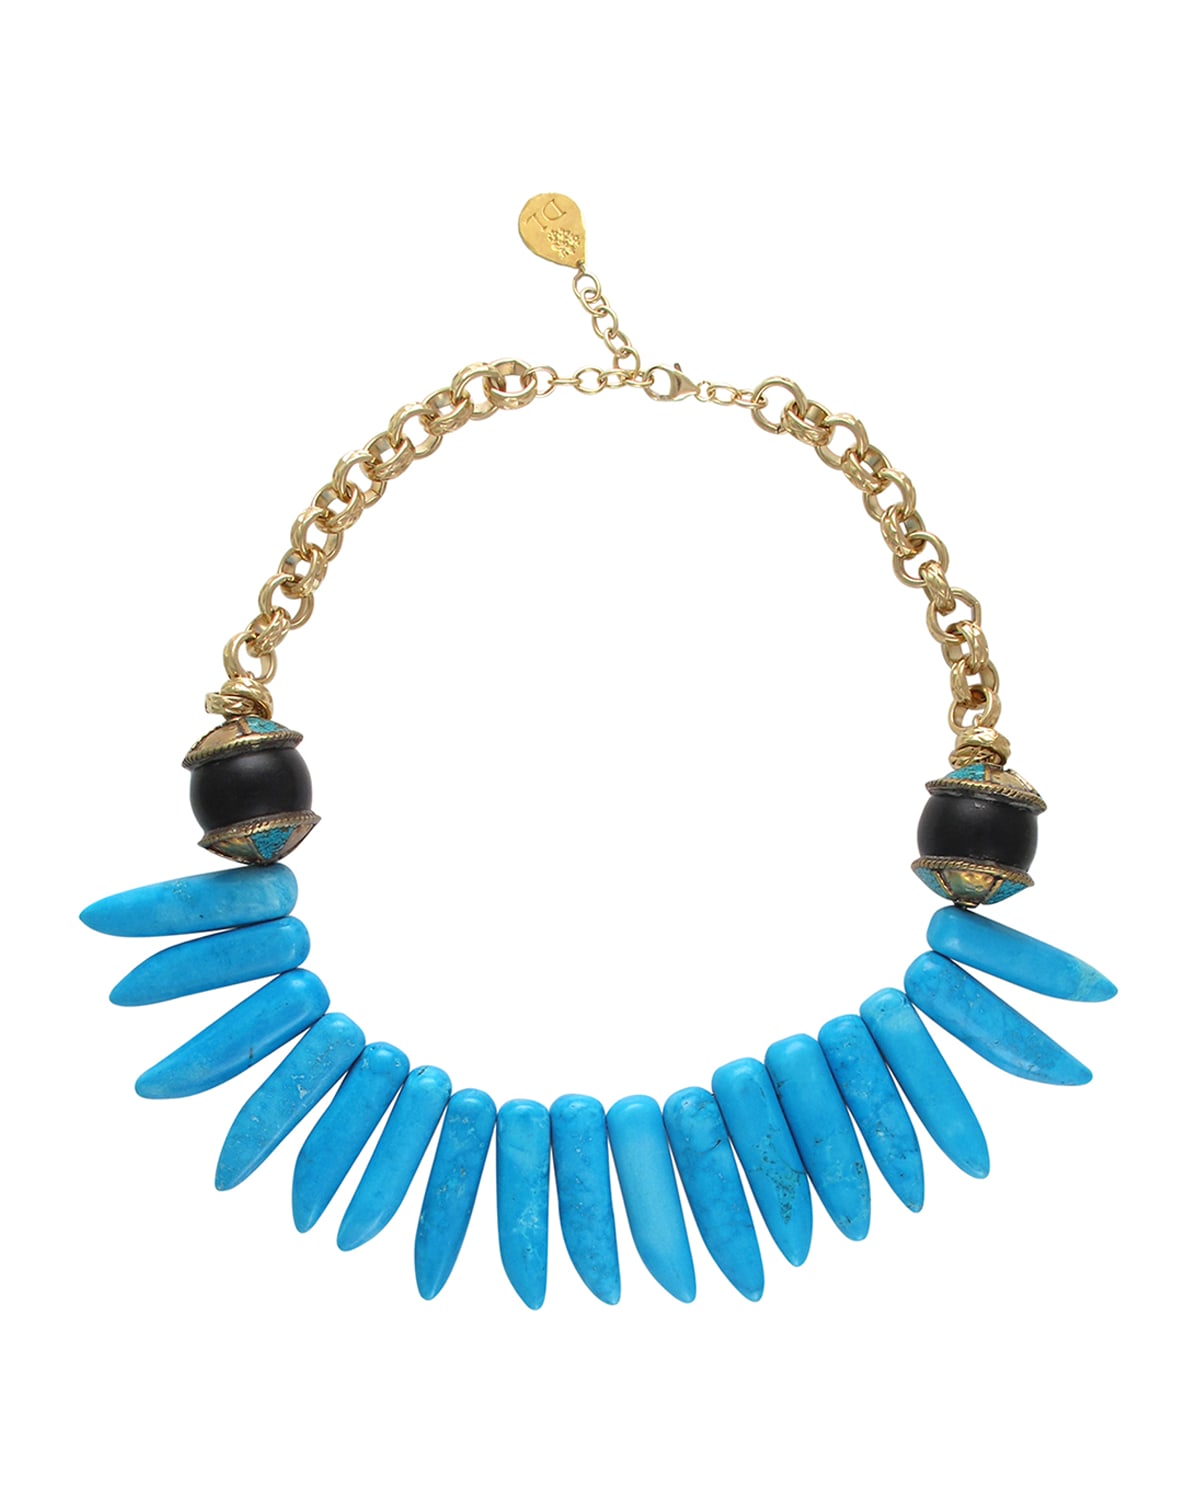 Devon Leigh Turquoise Spike Necklace